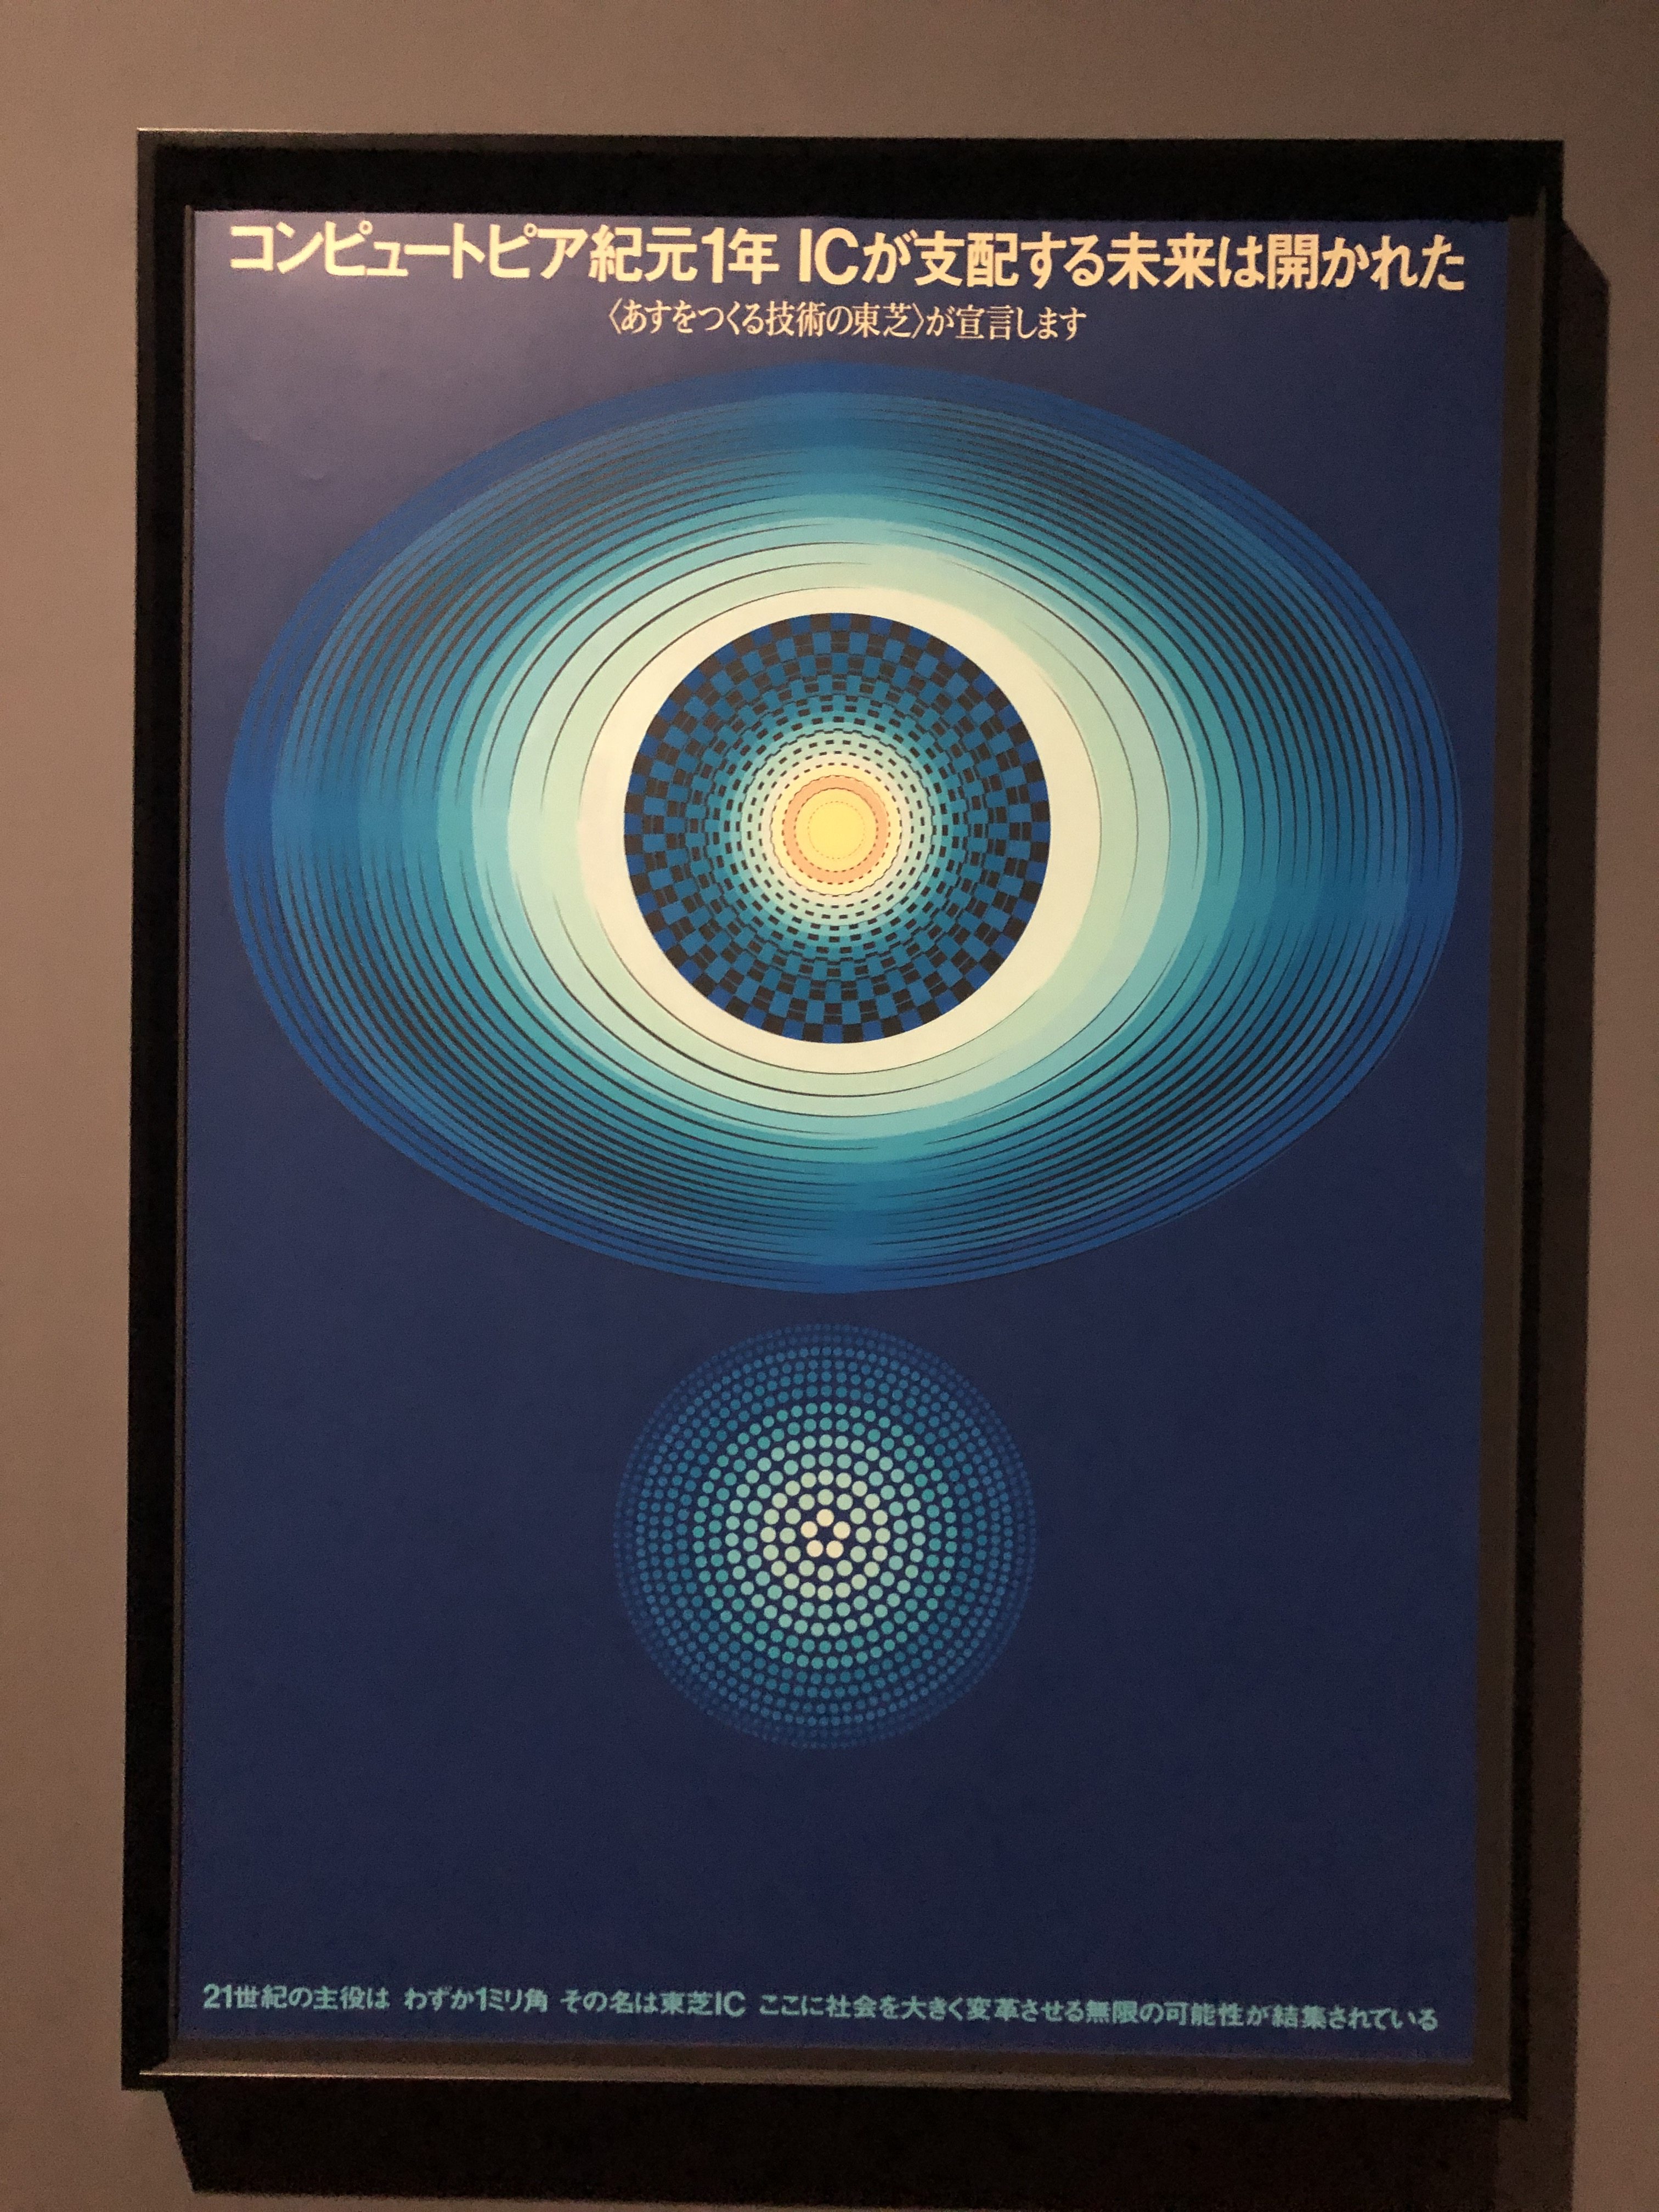 Poster, Toshiba Co., Ltd. (1967), Nagai Kazumasa. This commercial poster is included in “Shanshui: Echoes and Signals”, an exhibition aimed at expanding the notion of traditional East Asian ink landscape paintings